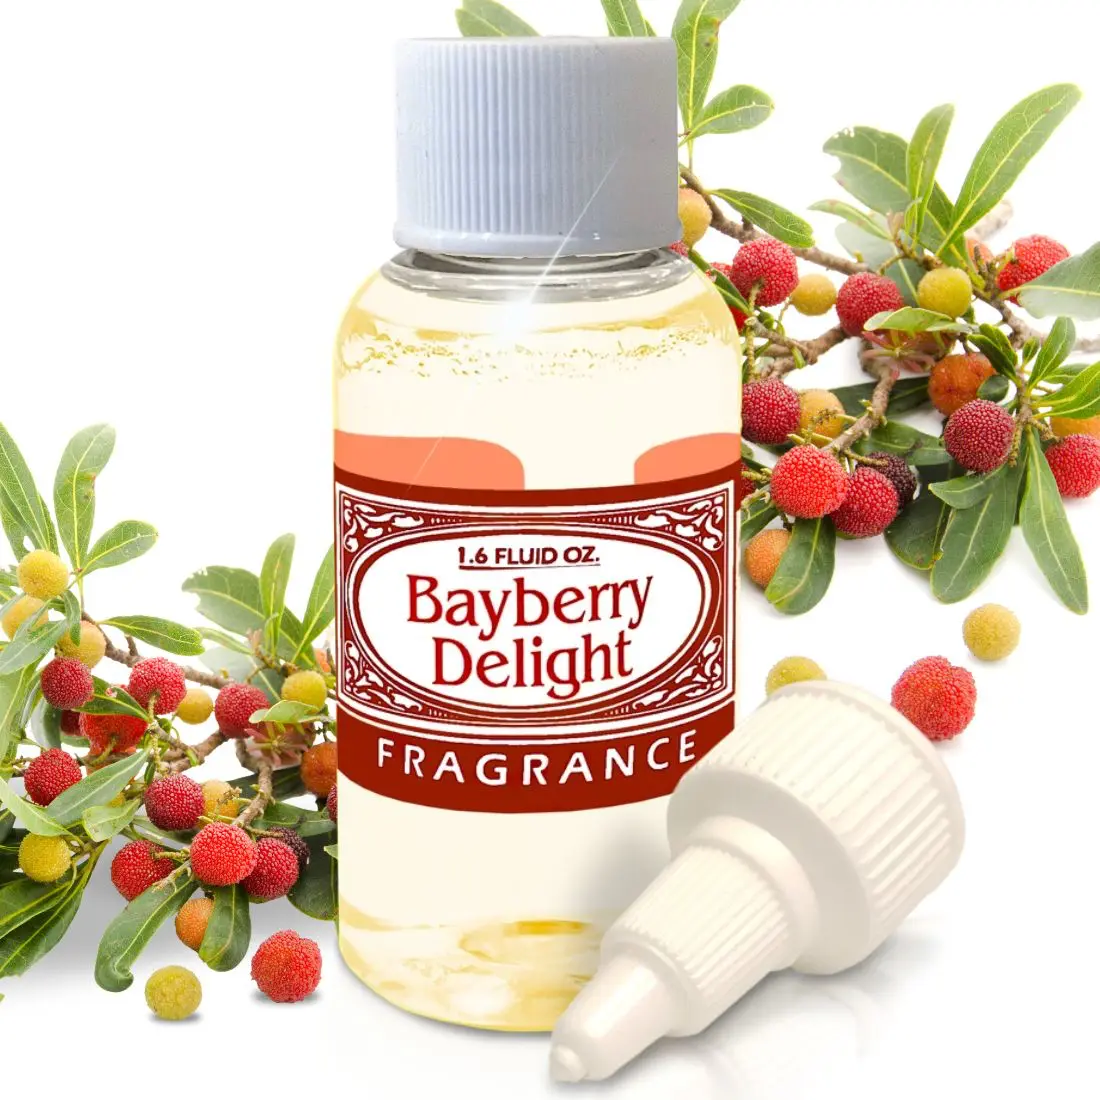 Bayberry Delight fragrance with dropper